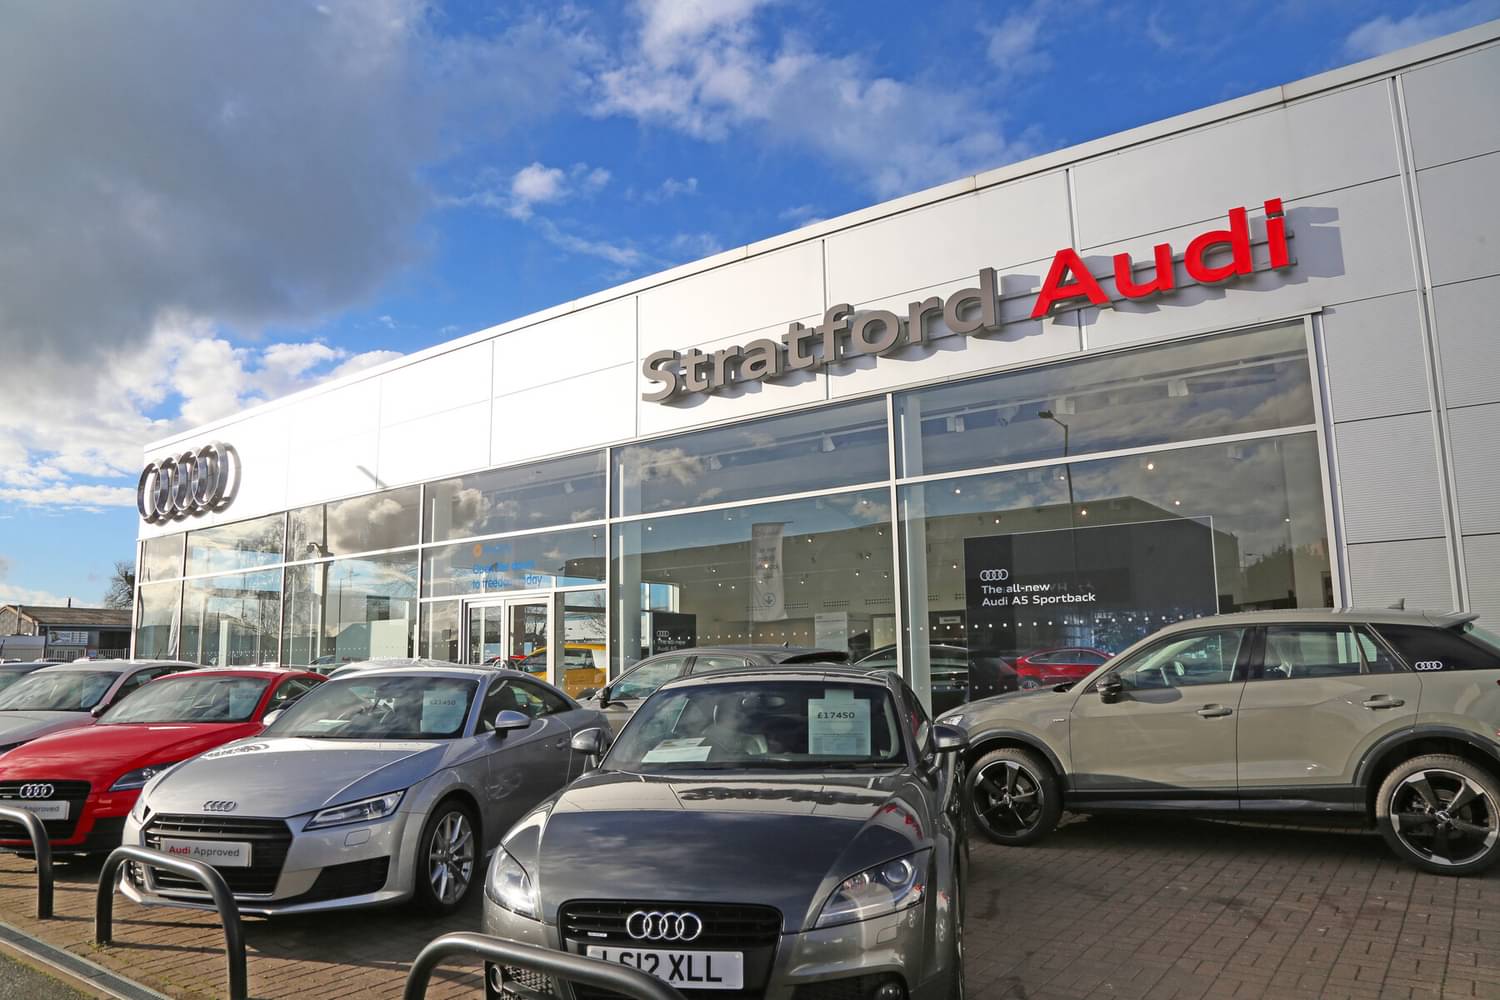 How do you find location information for an Audi dealership?